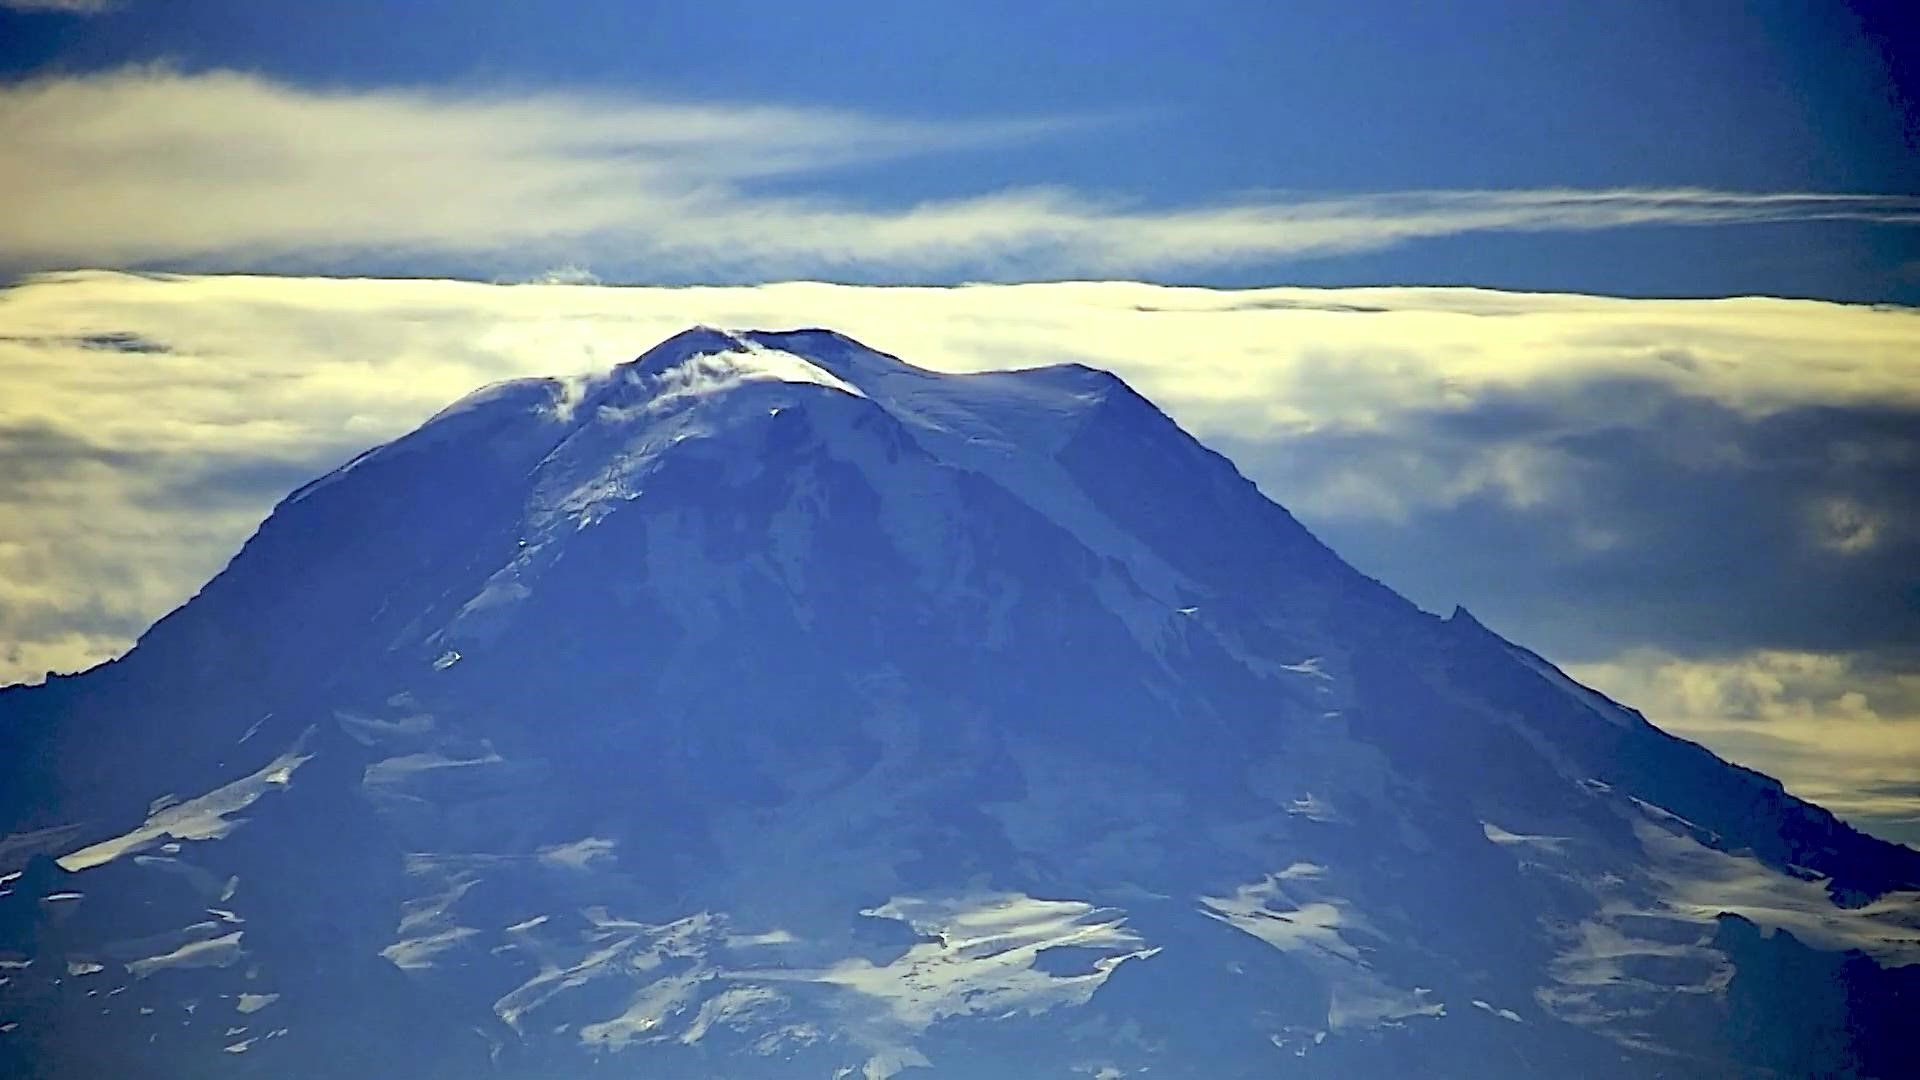 A lenticular cloud enveloped Mount Rainier, which made the mountain appear to be venting from certain angles. But the U.S. Geological Survey says that isn't the case